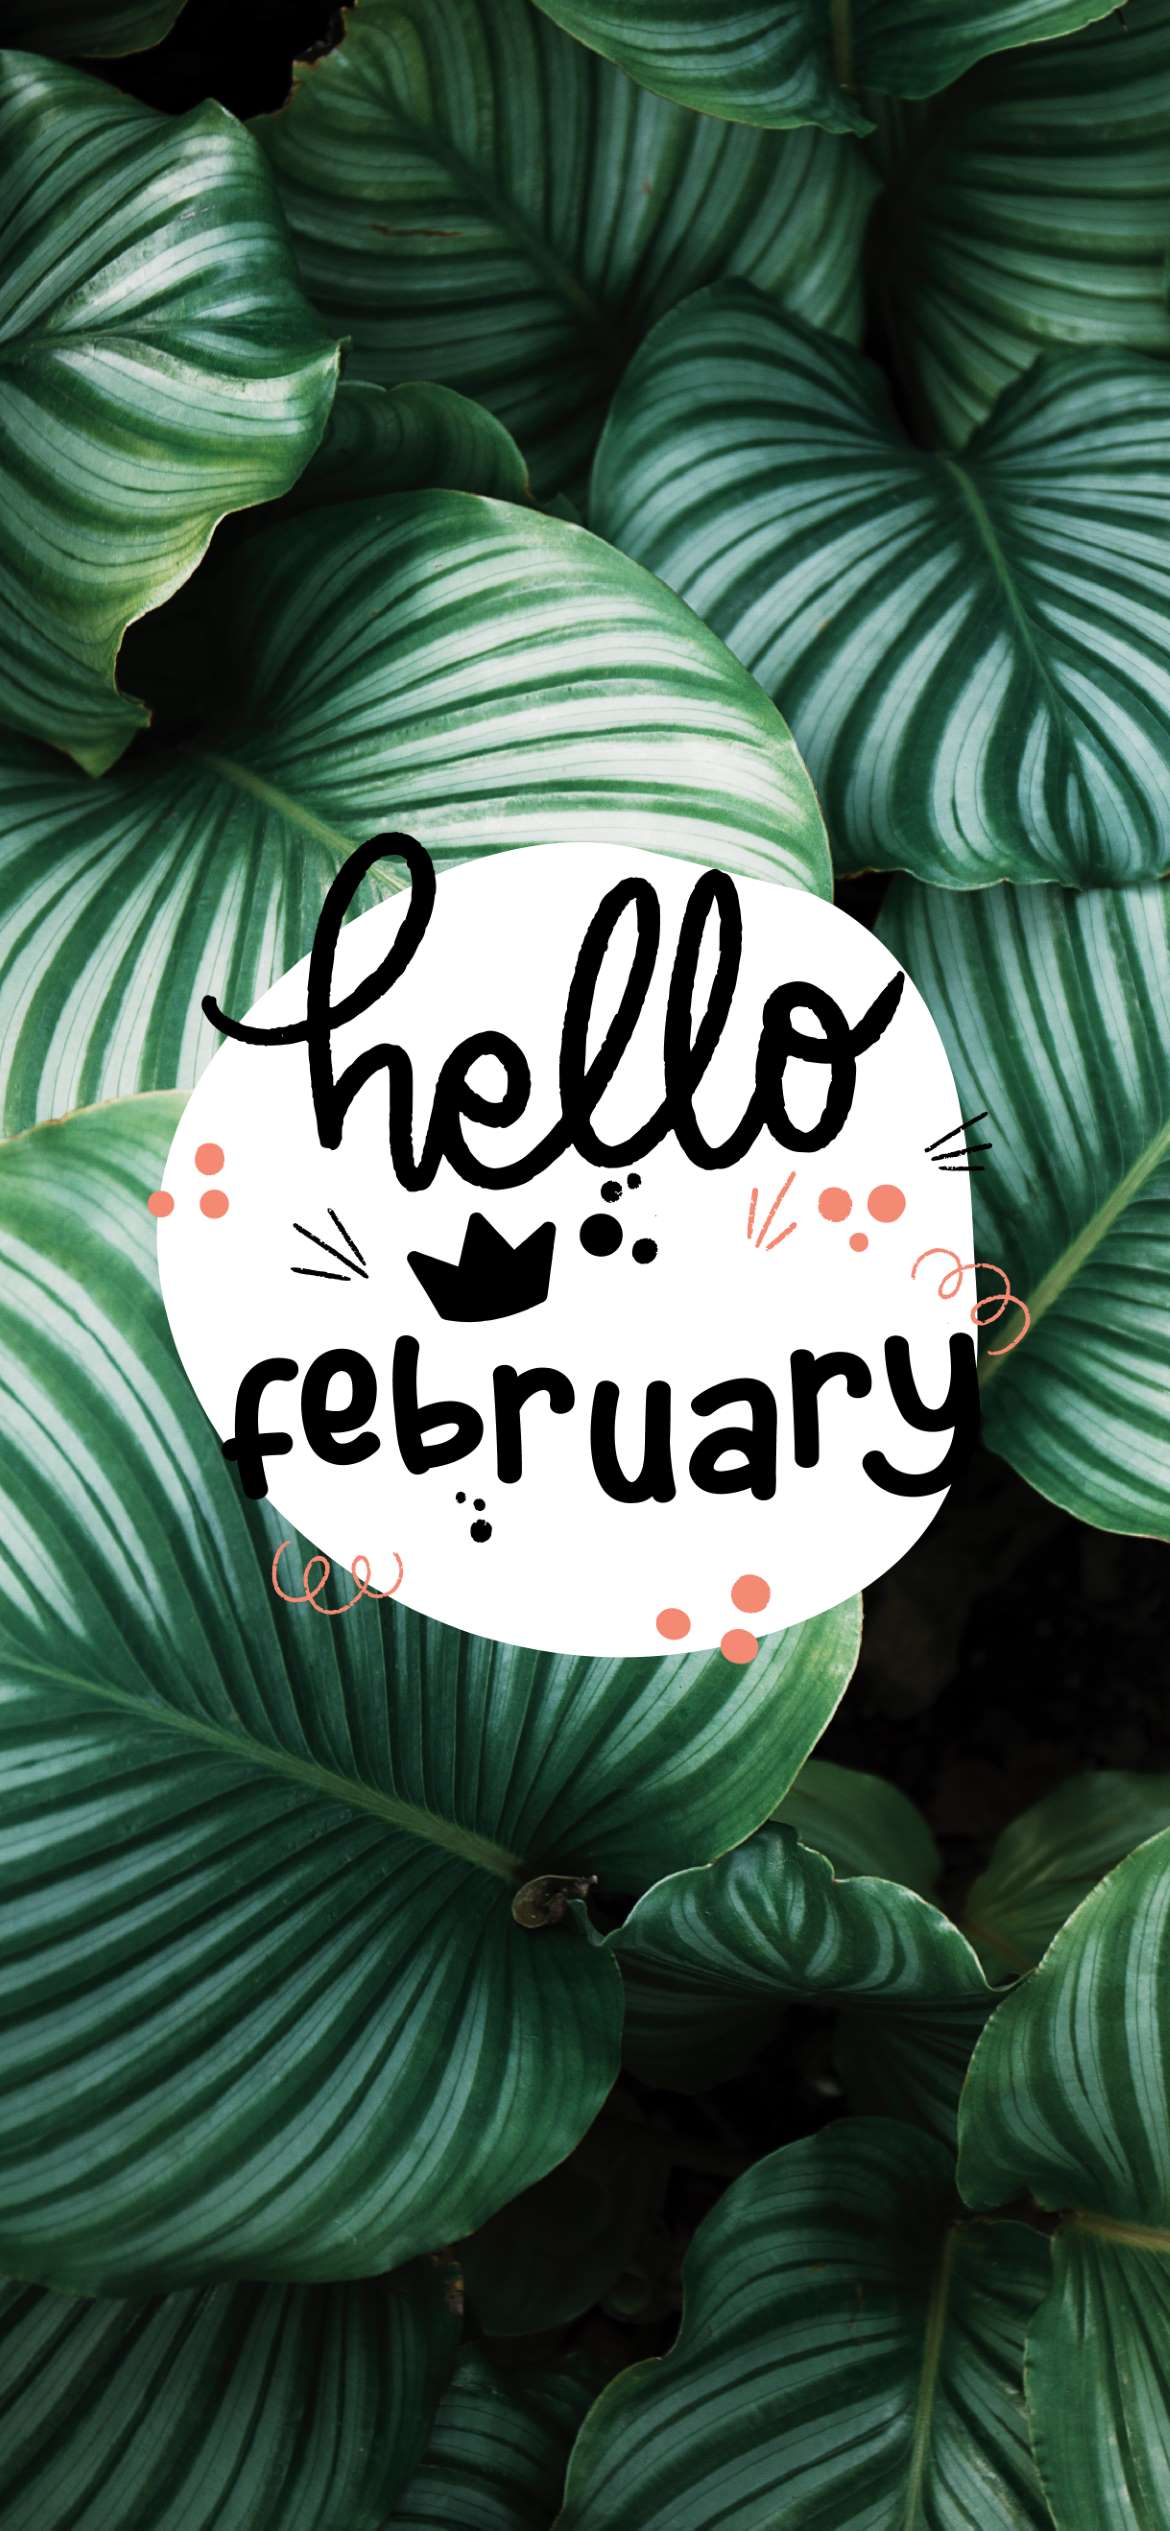 A hello february sign with green leaves - Leaves, botanical, February